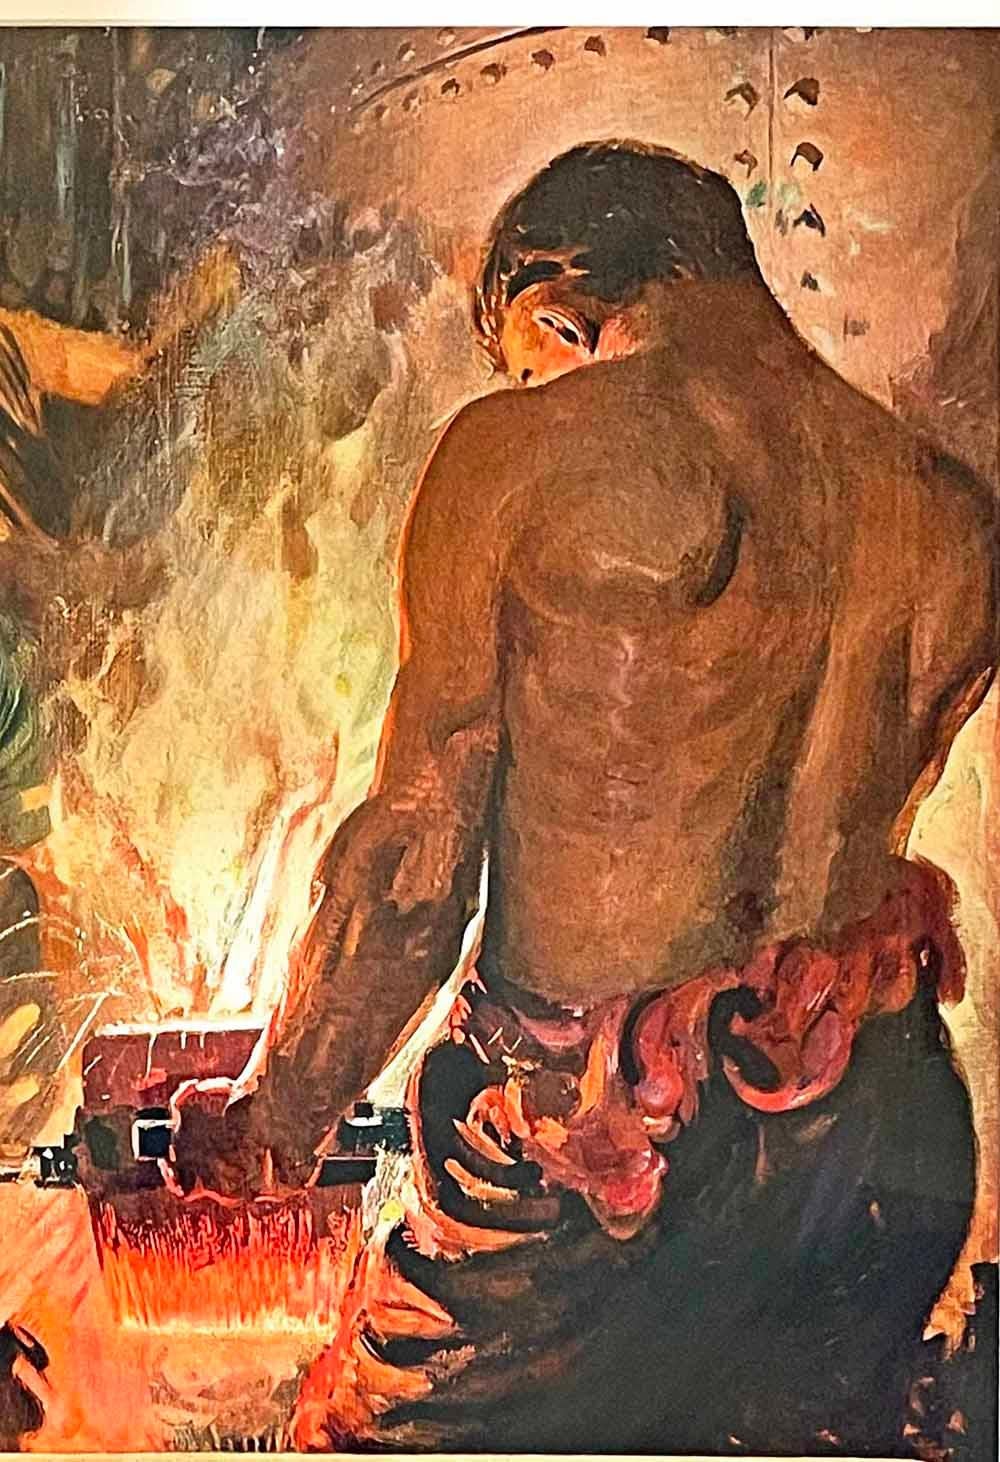 Highly rare and full of rich, dramatic color, this poster depicting three steelworkers, their bodies rosy from the glow of molten steel at their fingertips, was issued by the National Service Bureau Inc. of New York and Chicago to encourage saving